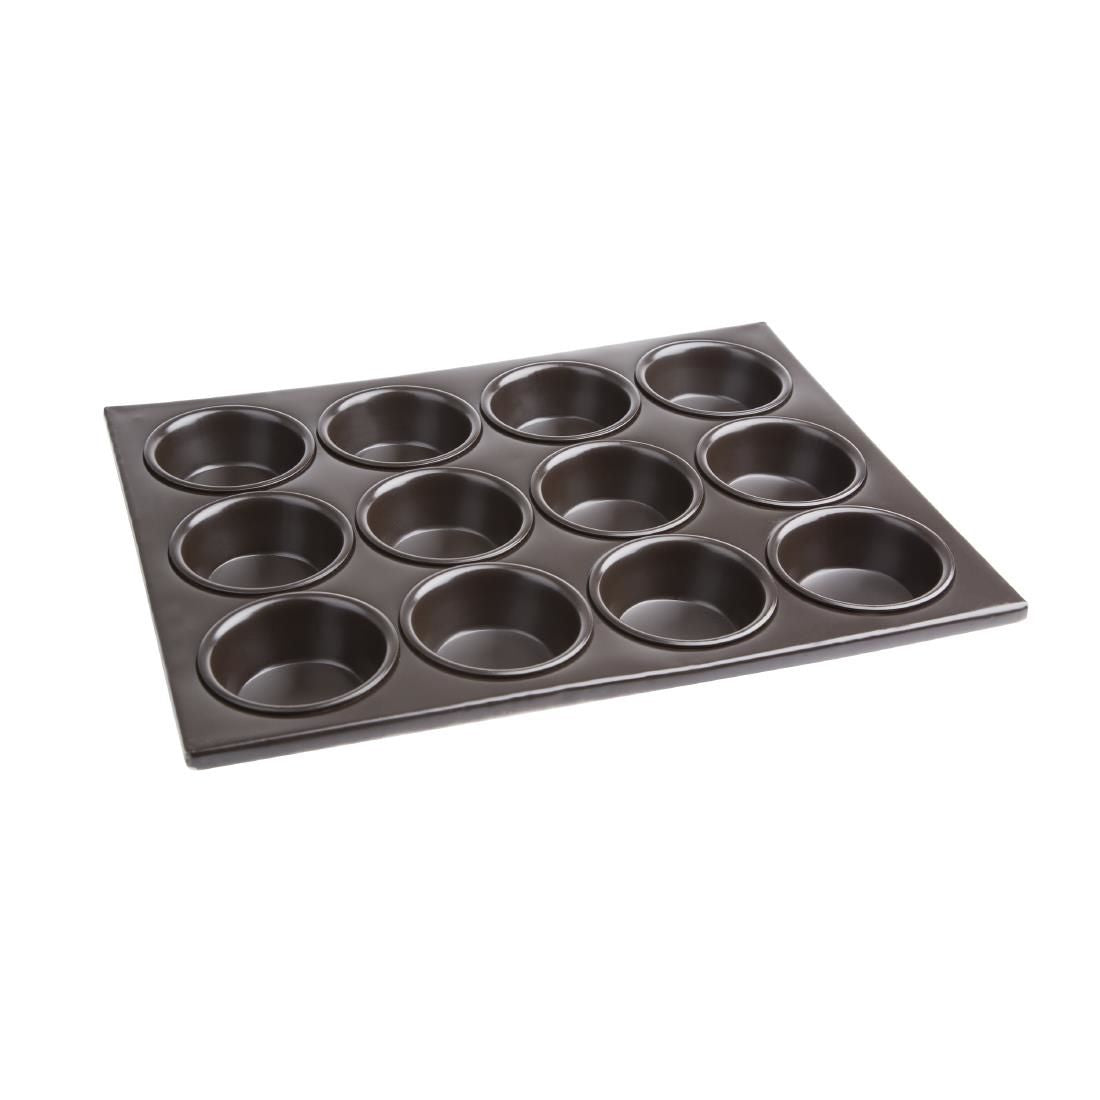 Vogue Aluminium Non-Stick Muffin Tray 12 Cup - C562 Baking Tins & Trays Vogue   